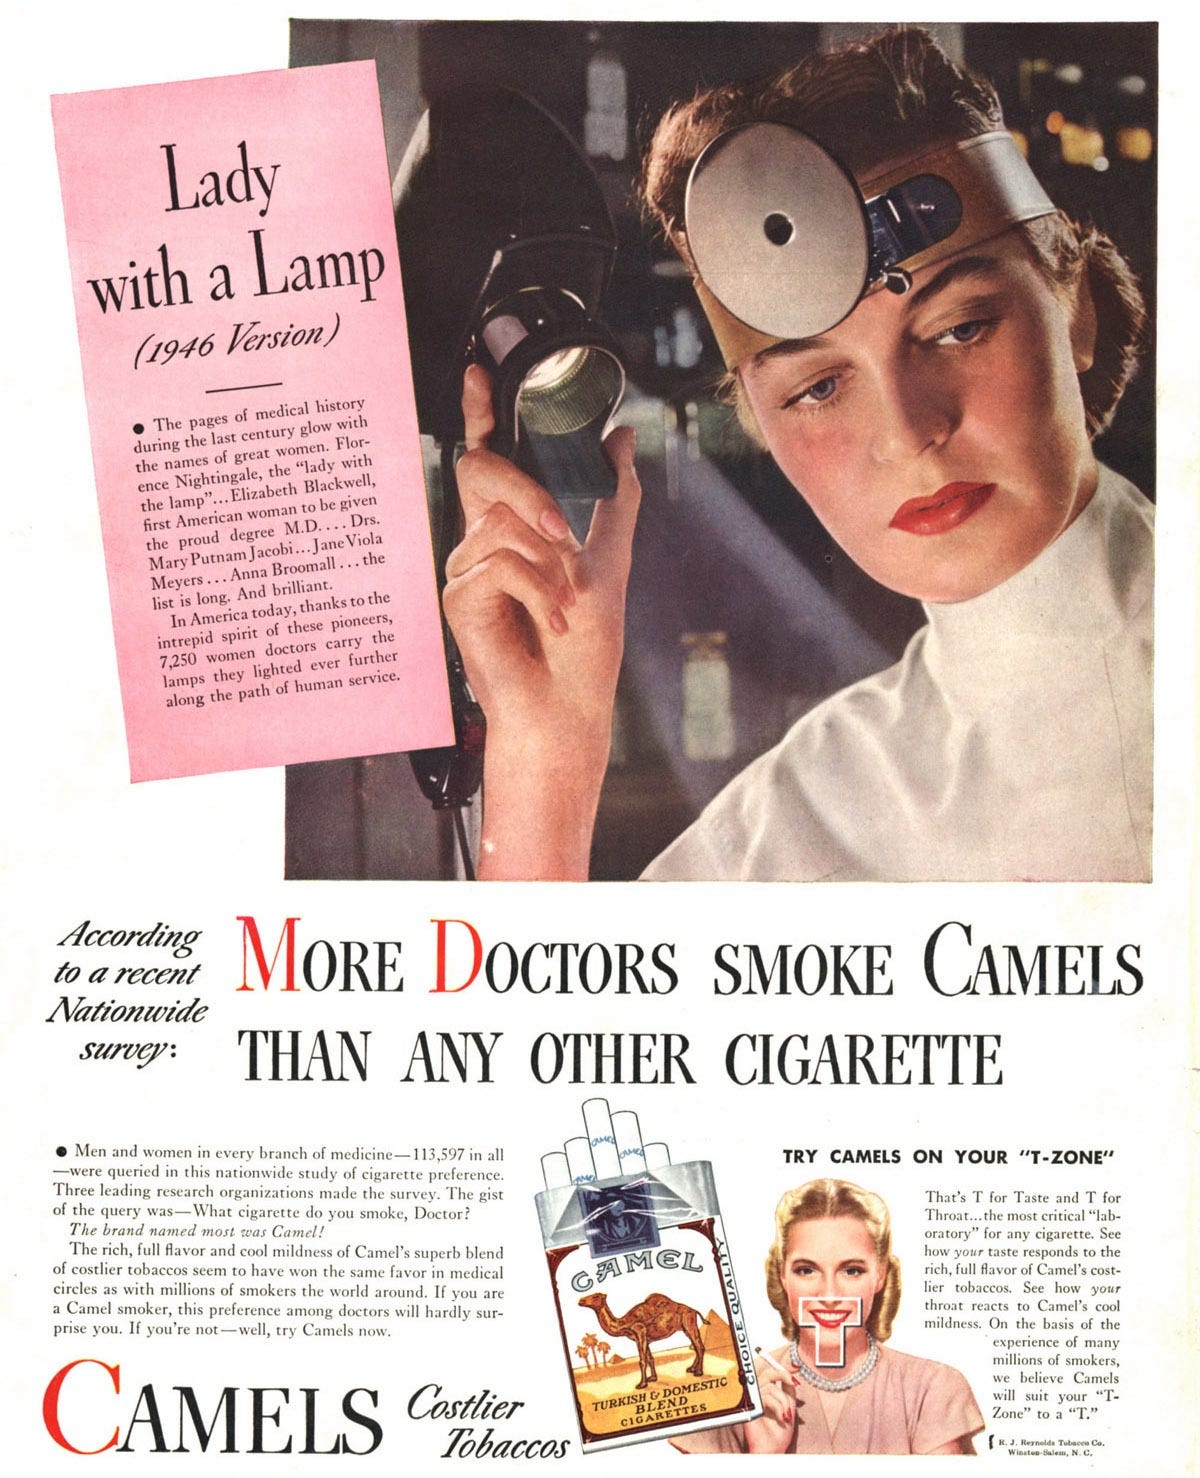 A colour photograph shows a woman in white surgical scrubs. She is wearing a head mirror and red lipstick, and is directing a lamp towards something out of shot; the scene could be an operating theatre. A panel on the left is headed ‘Lady with a Lamp (1946 version)’ and commends the ‘intrepid spirit’ of pioneering female doctors. Under the photo is the strapline ‘More doctors smoke Camels than any other cigarette.’